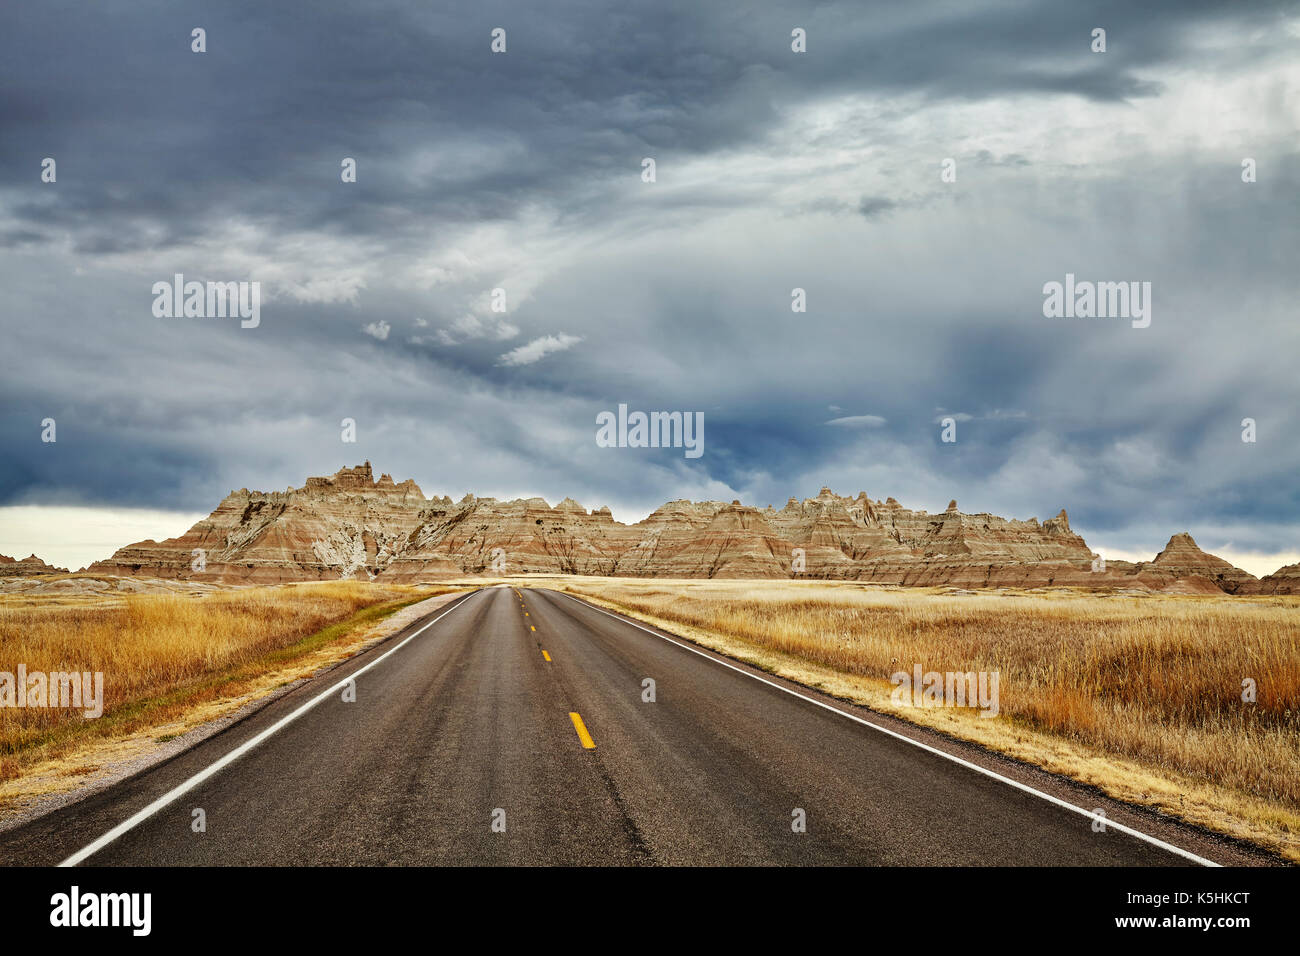 Picturesque road in Badlands National Park with stormy sky, travel concept background, South Dakota, USA. Stock Photo